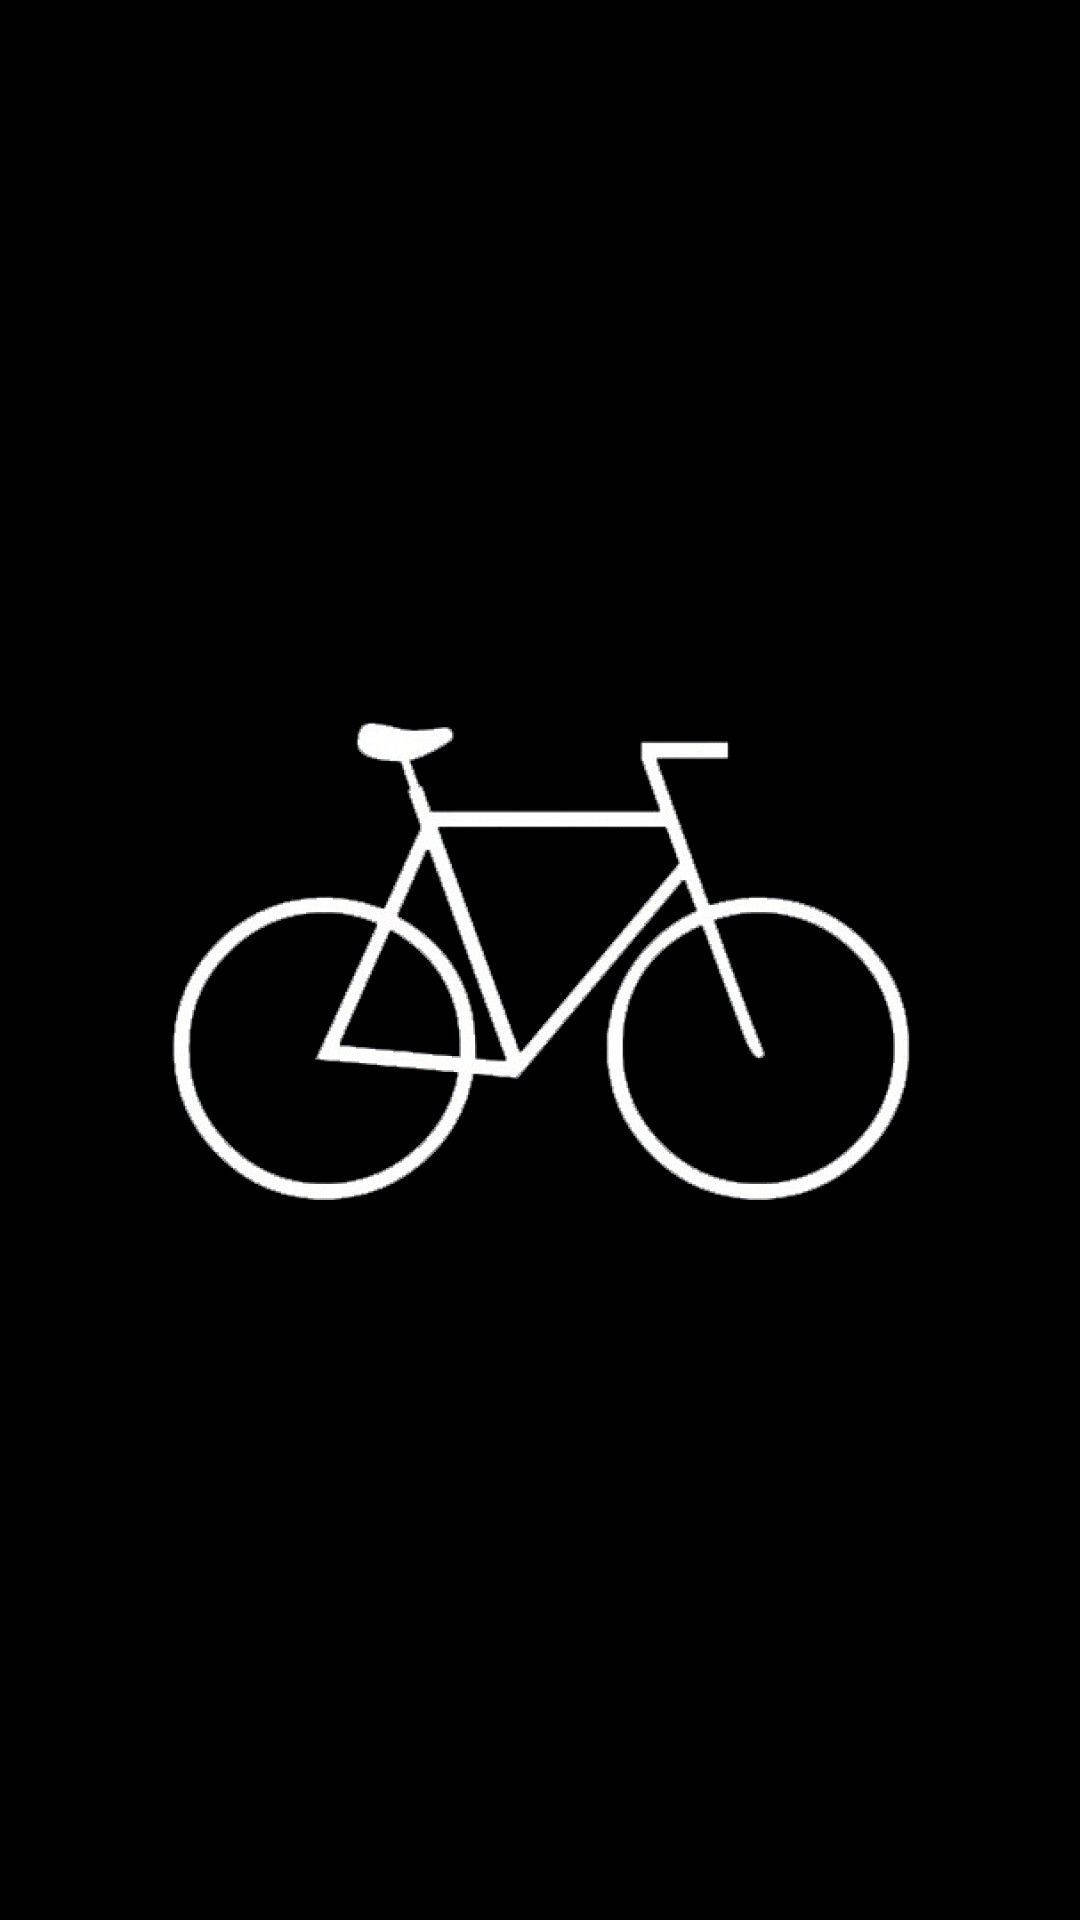 Bicycle Iphone Wallpaper